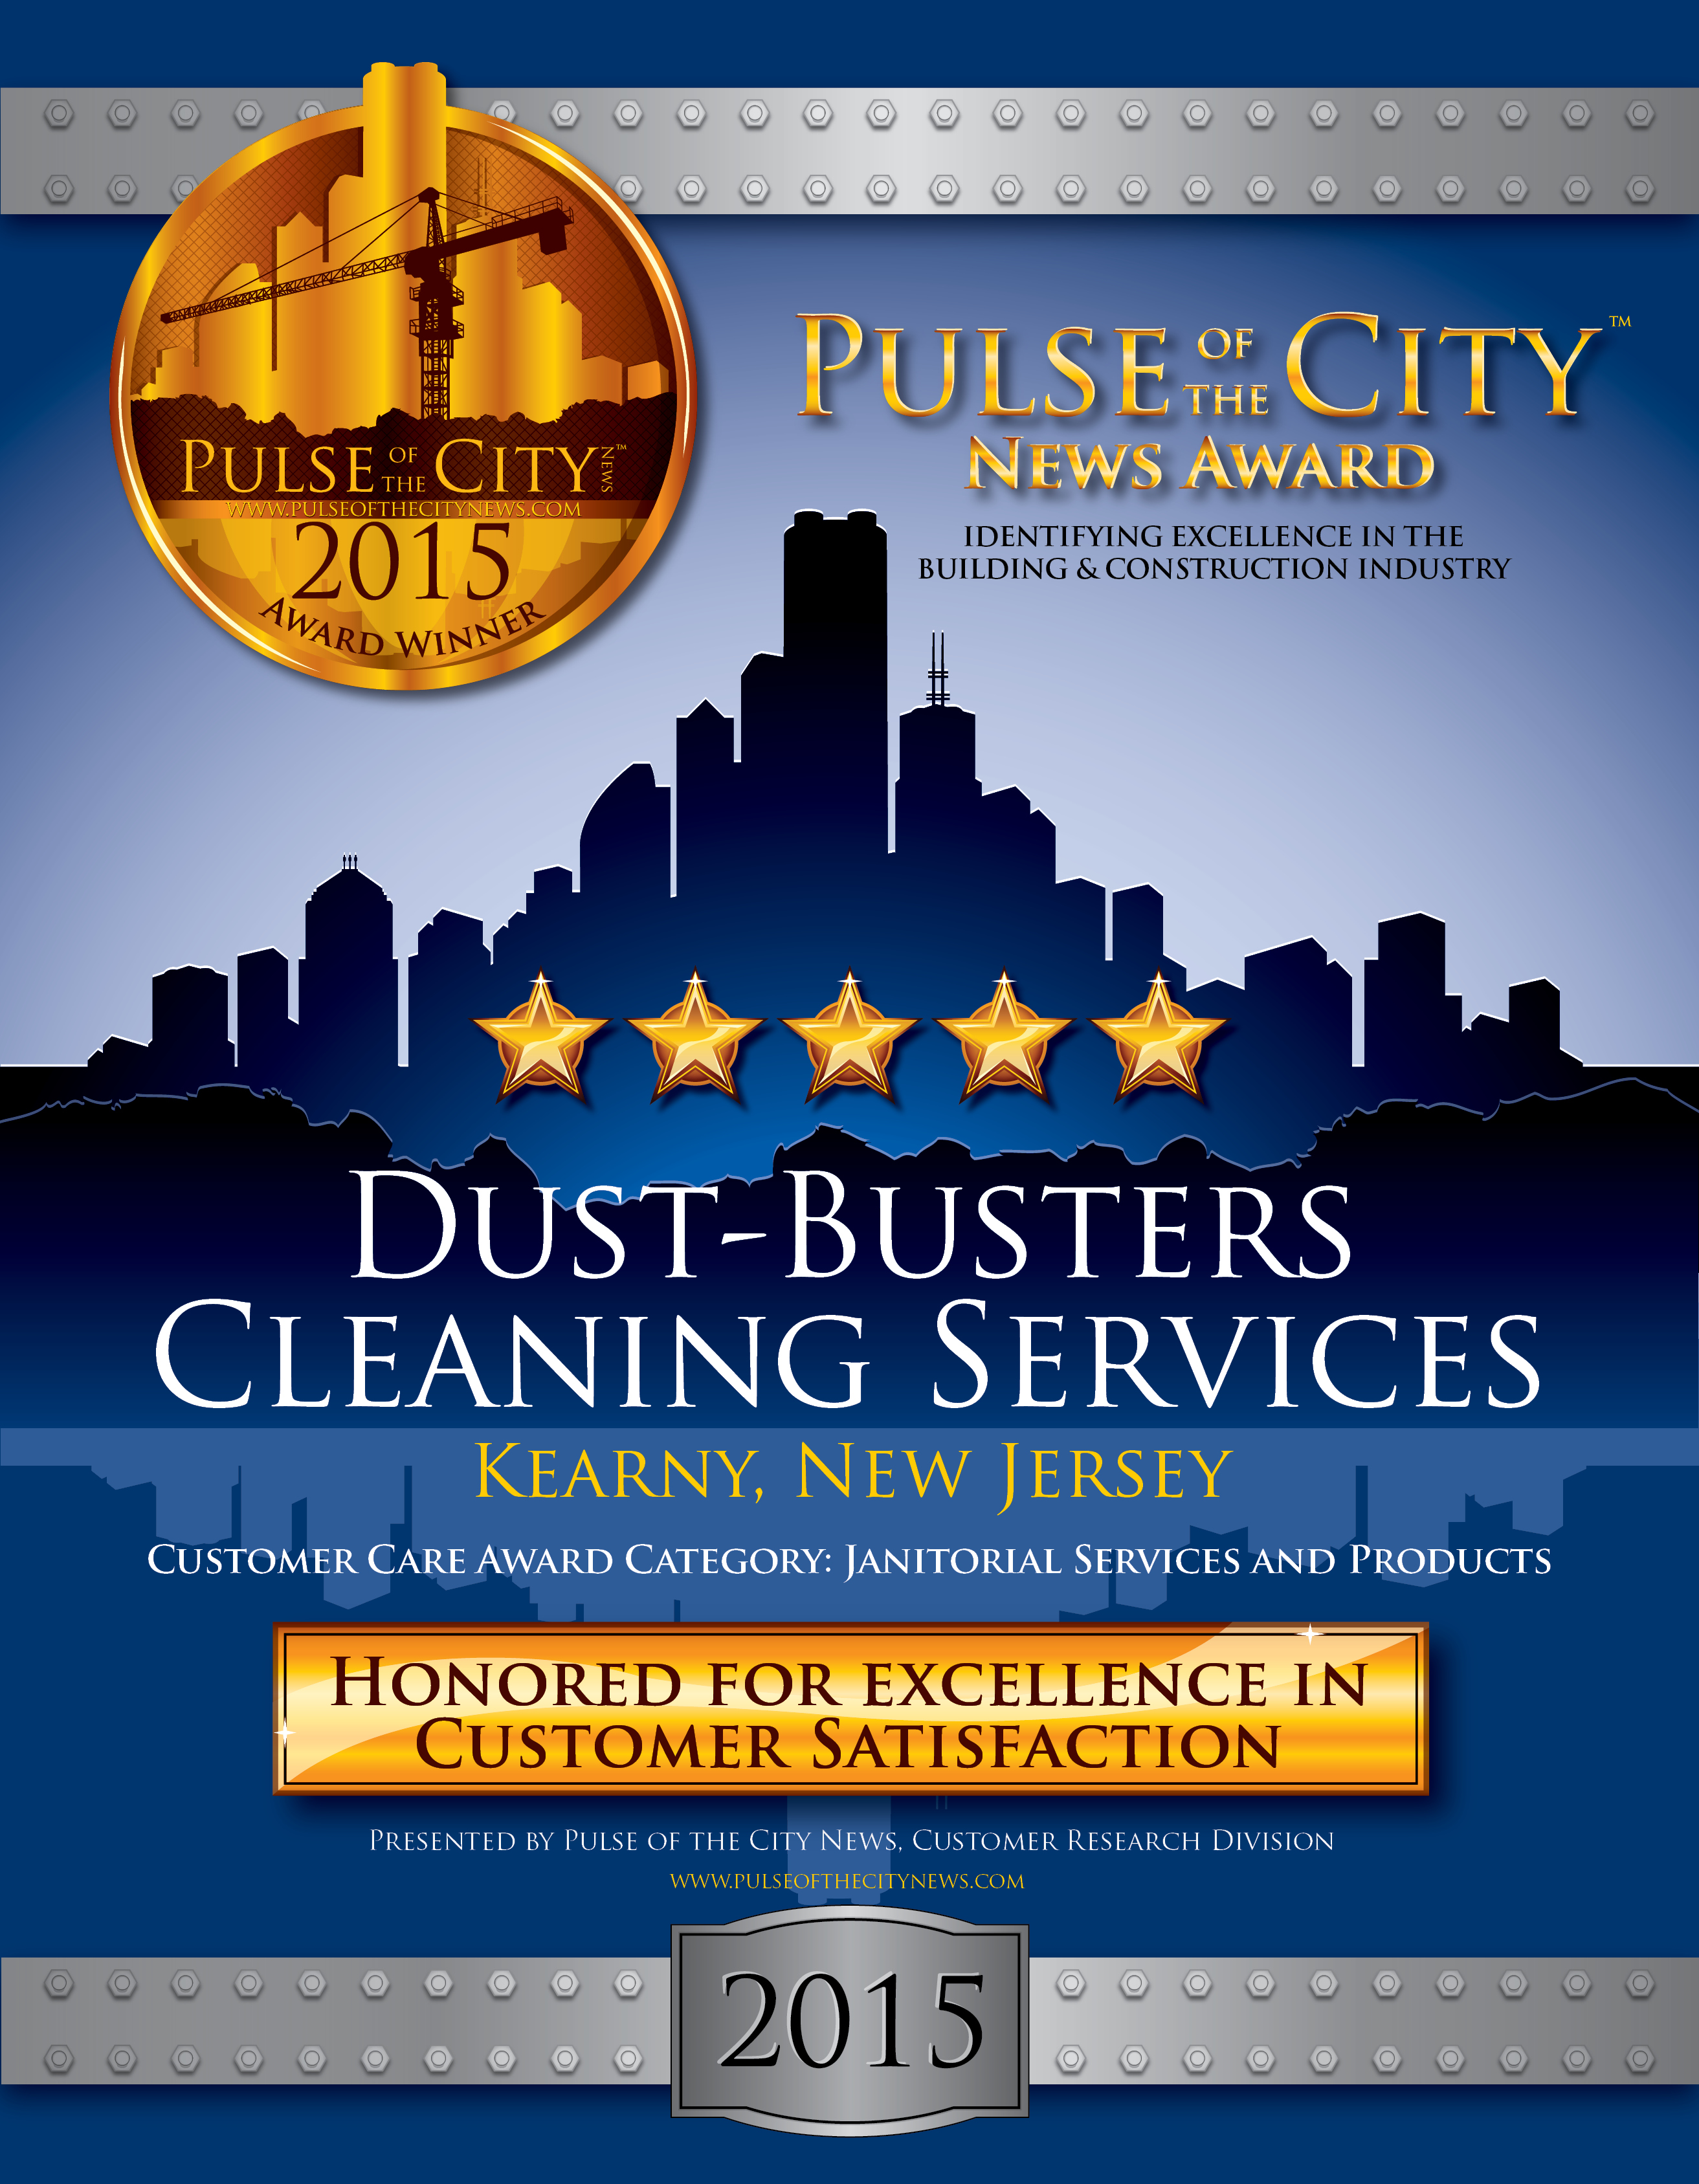 dust-busters-cleaning-services-2015.jpg